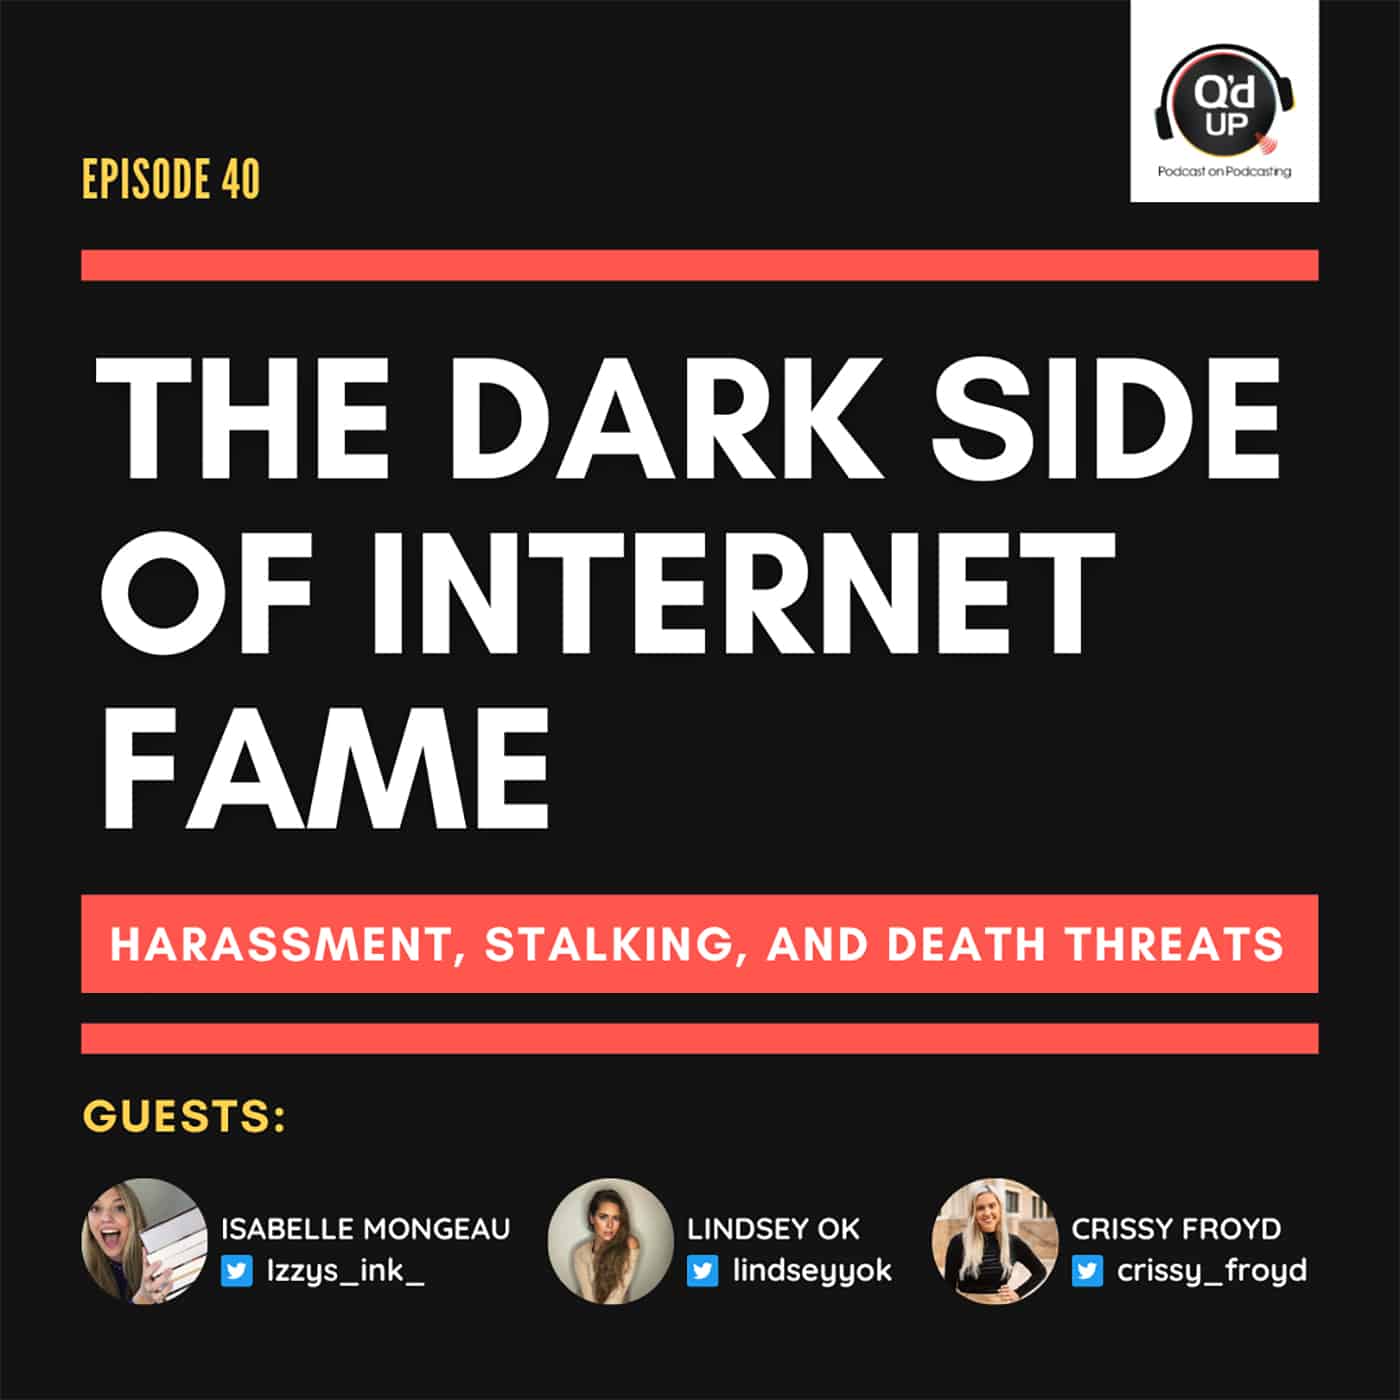 The Dark Side Of Internet Fame - Cyberbullying, Harassment, Stalking, and Death Threats